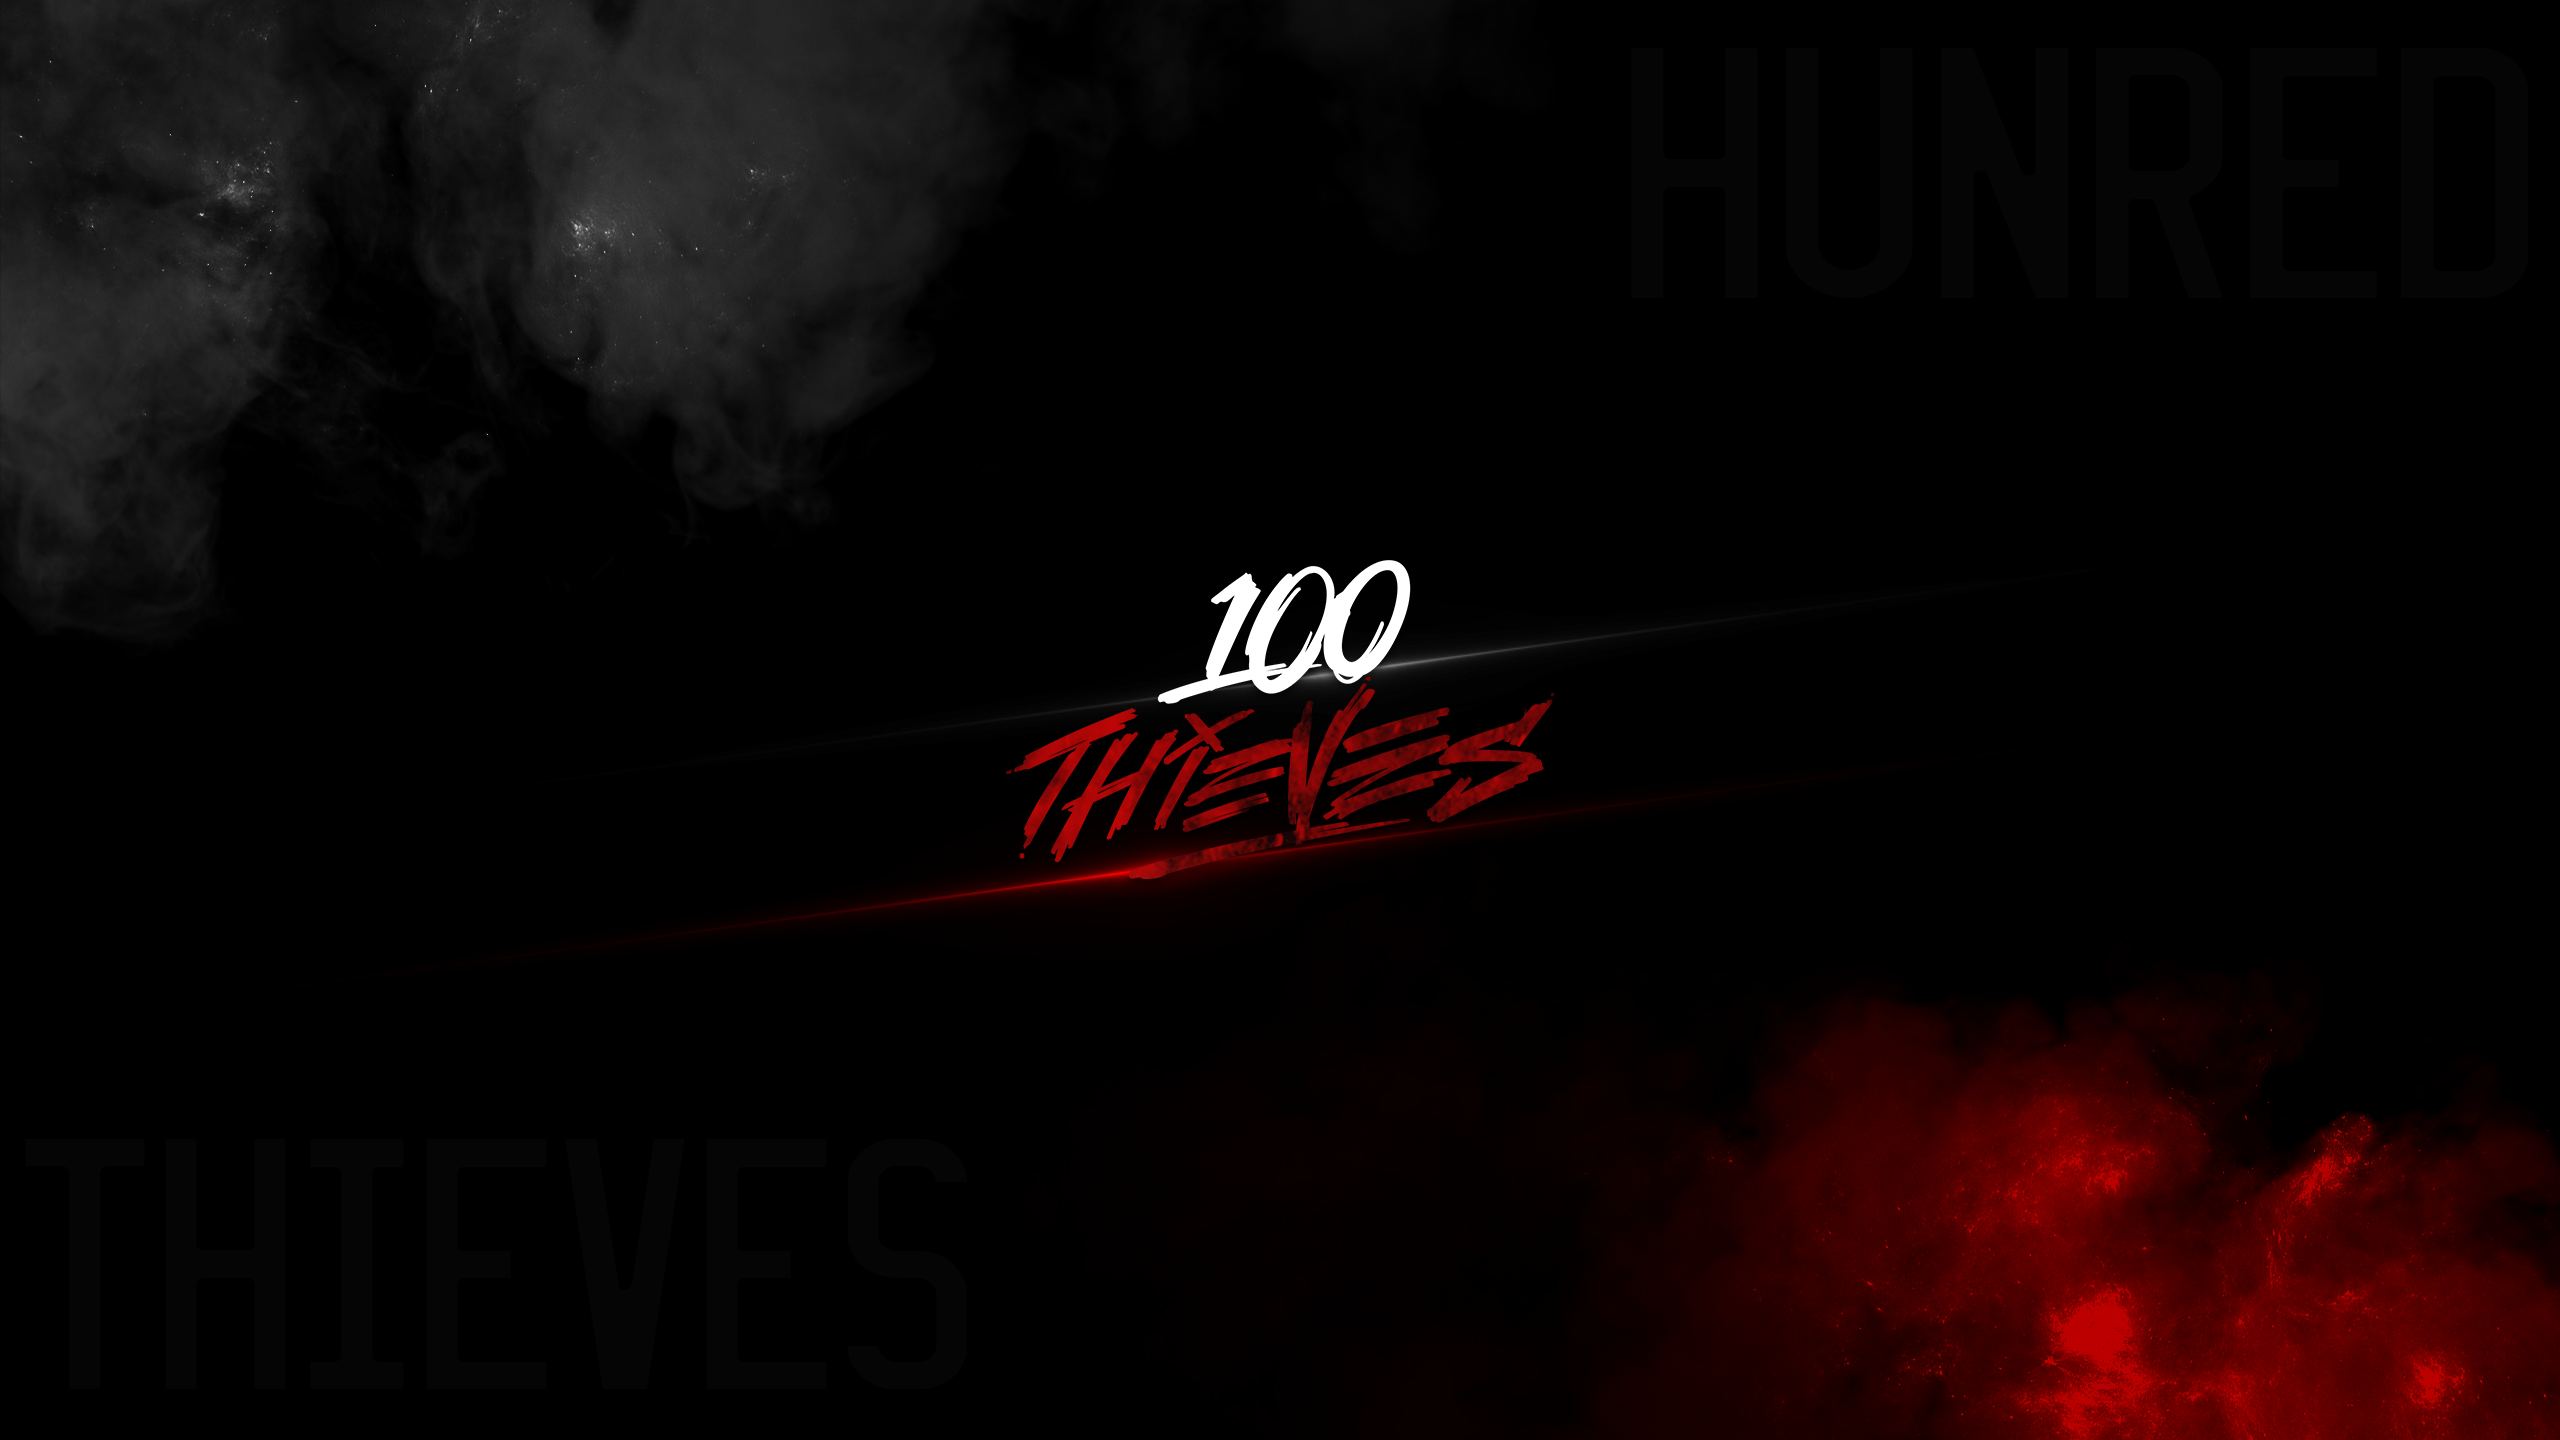 Download Representing 100 Thieves  The Future of Esports  Streetwear  Wallpaper  Wallpaperscom